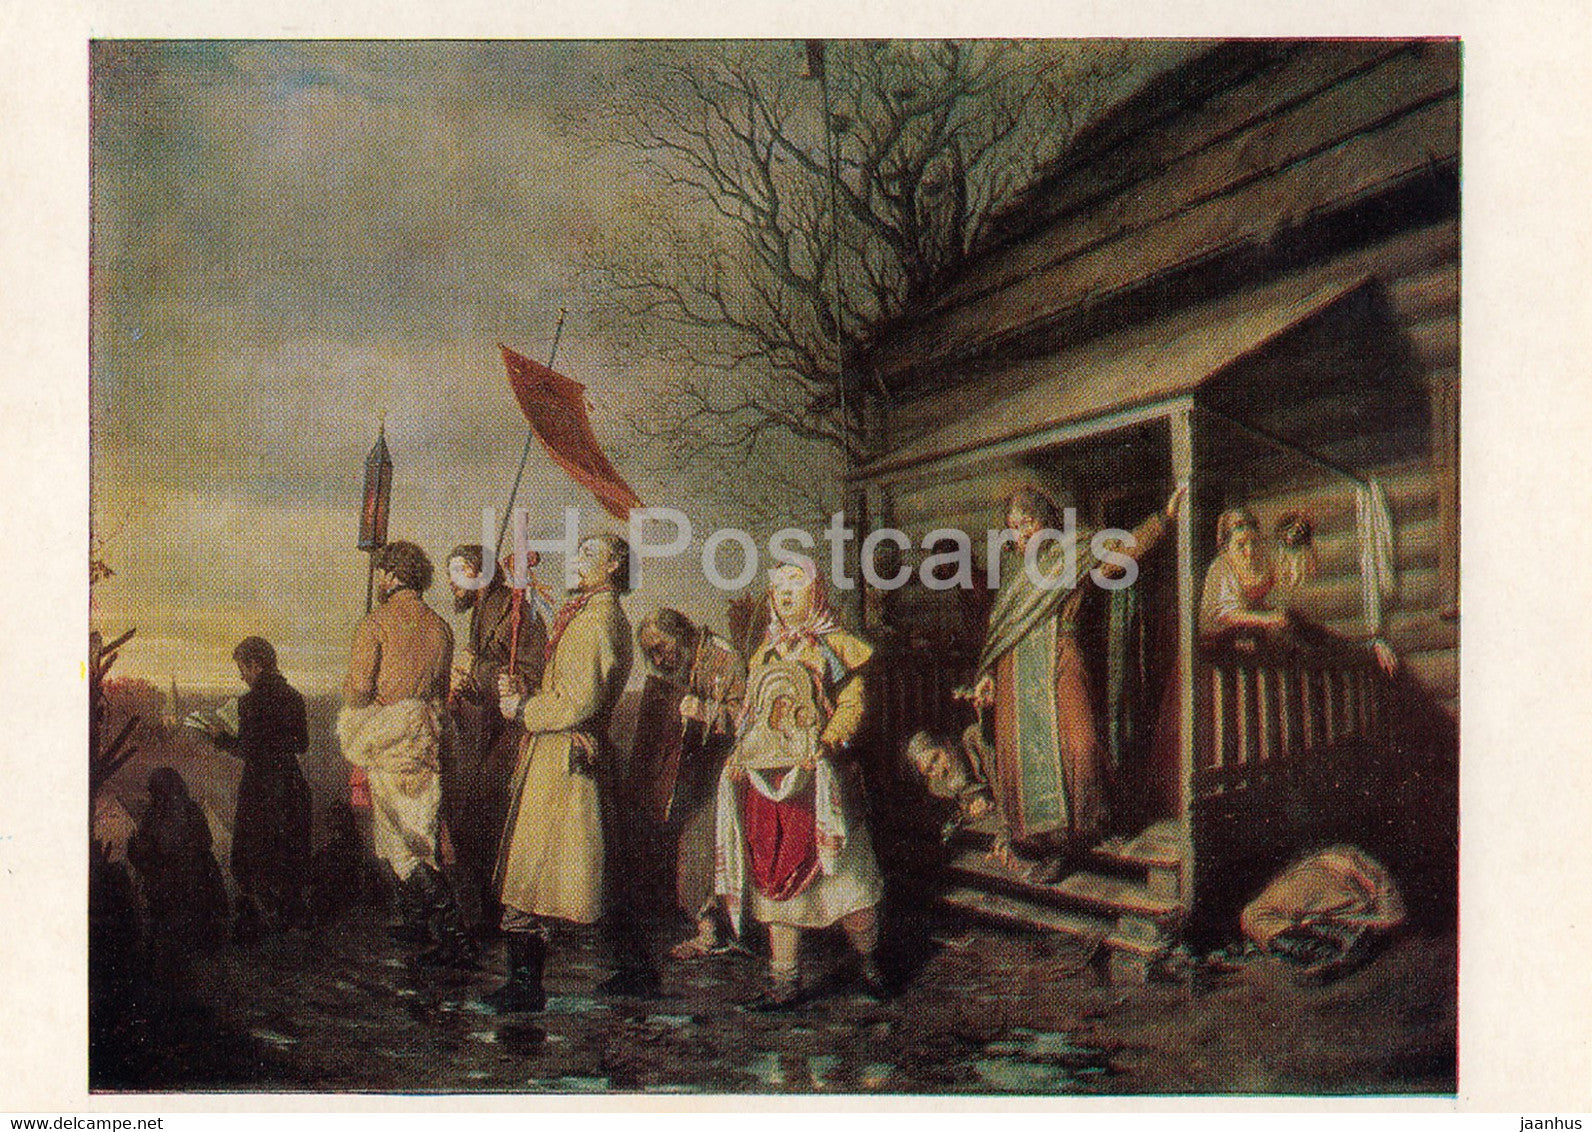 painting by V. Perov - Rural procession at Easter - Russian art - 1983 - Russia USSR - unused - JH Postcards